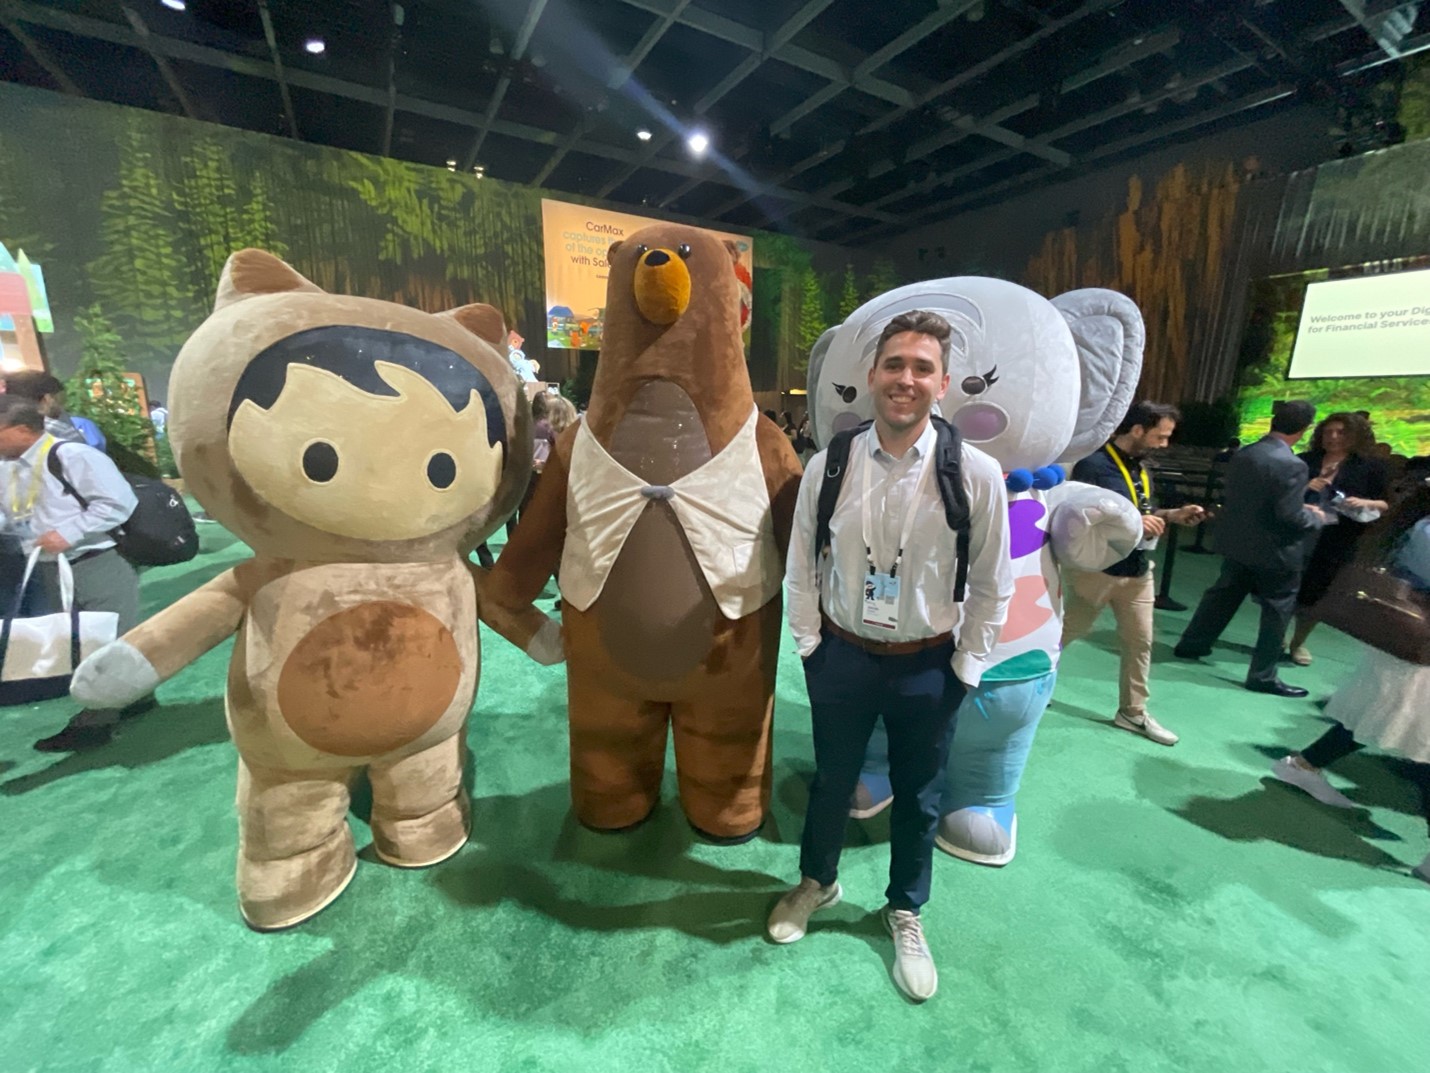 Jacob poses with Salesforce mascots